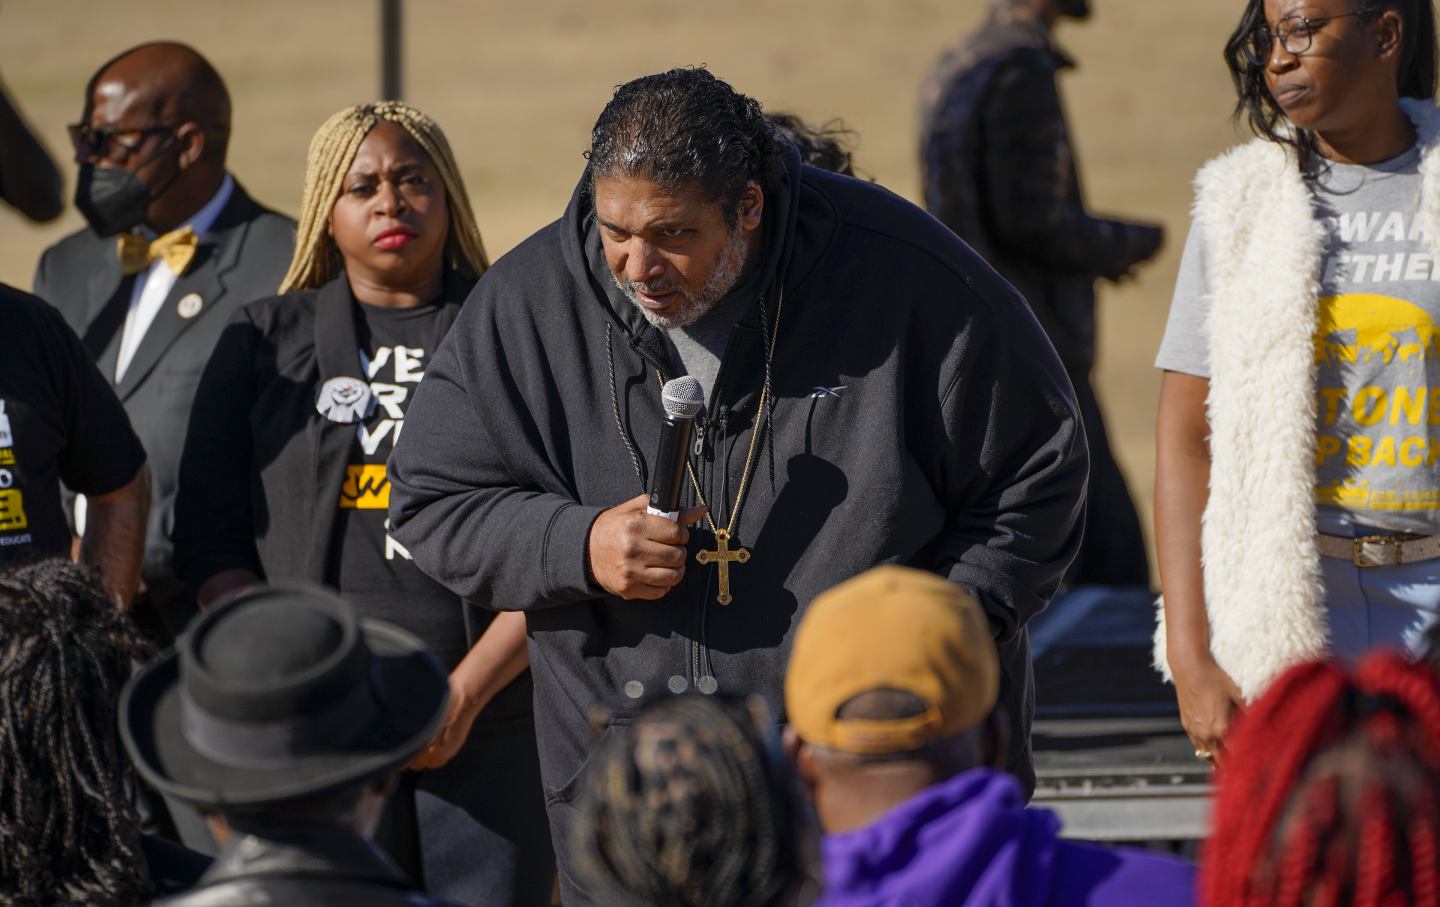 Reverend William Barber II speaks during an early voting rally near a polling location in Columbus, Georgia, US, on Sunday, Nov. 27, 2022.